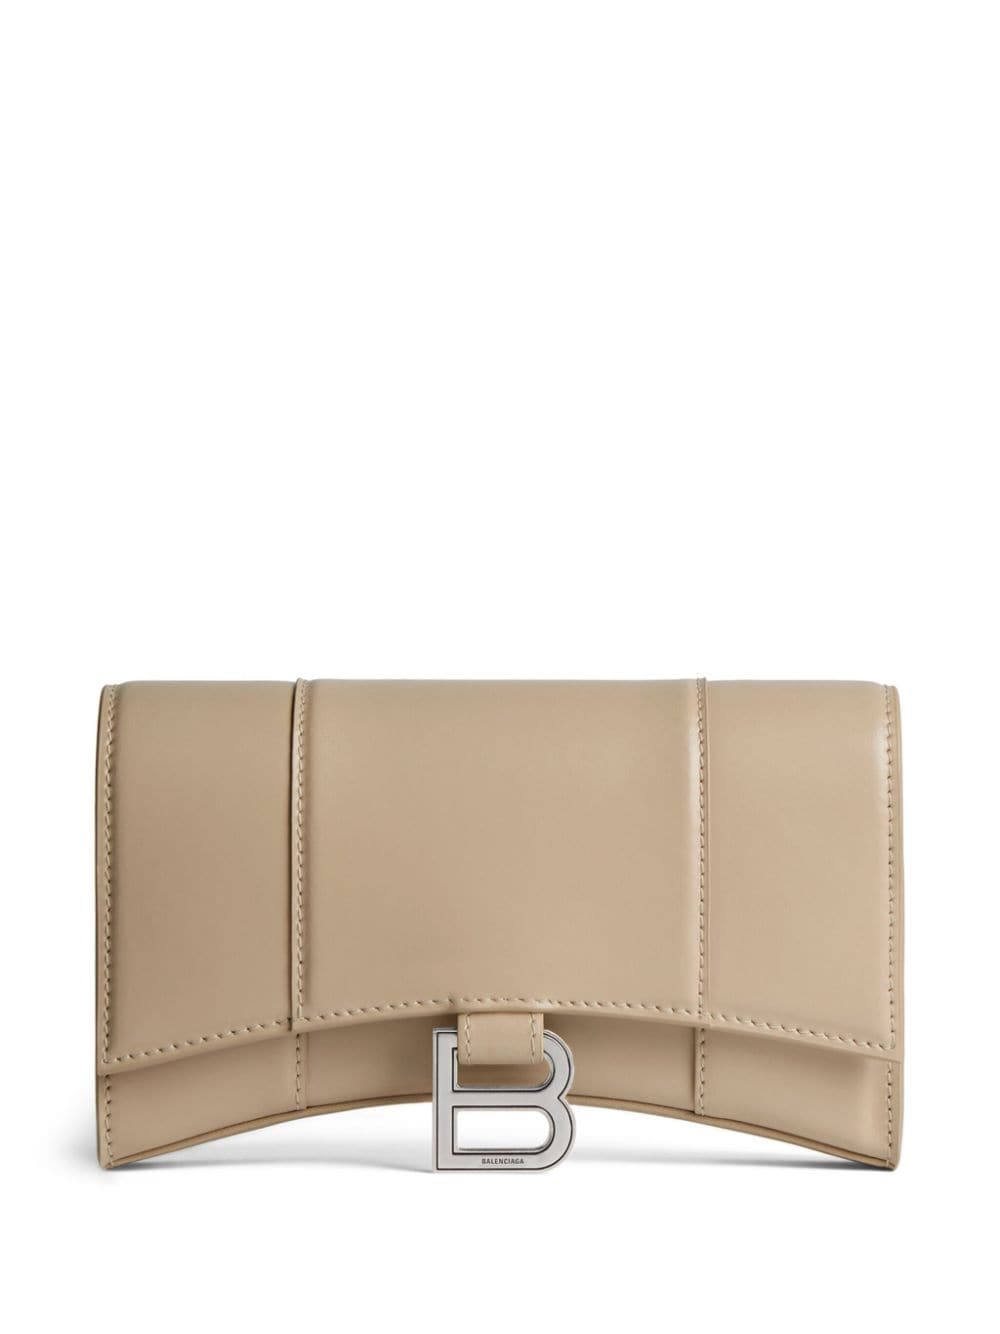 Balenciaga Hourglass Leather Wallet-on-chain In Neutrals